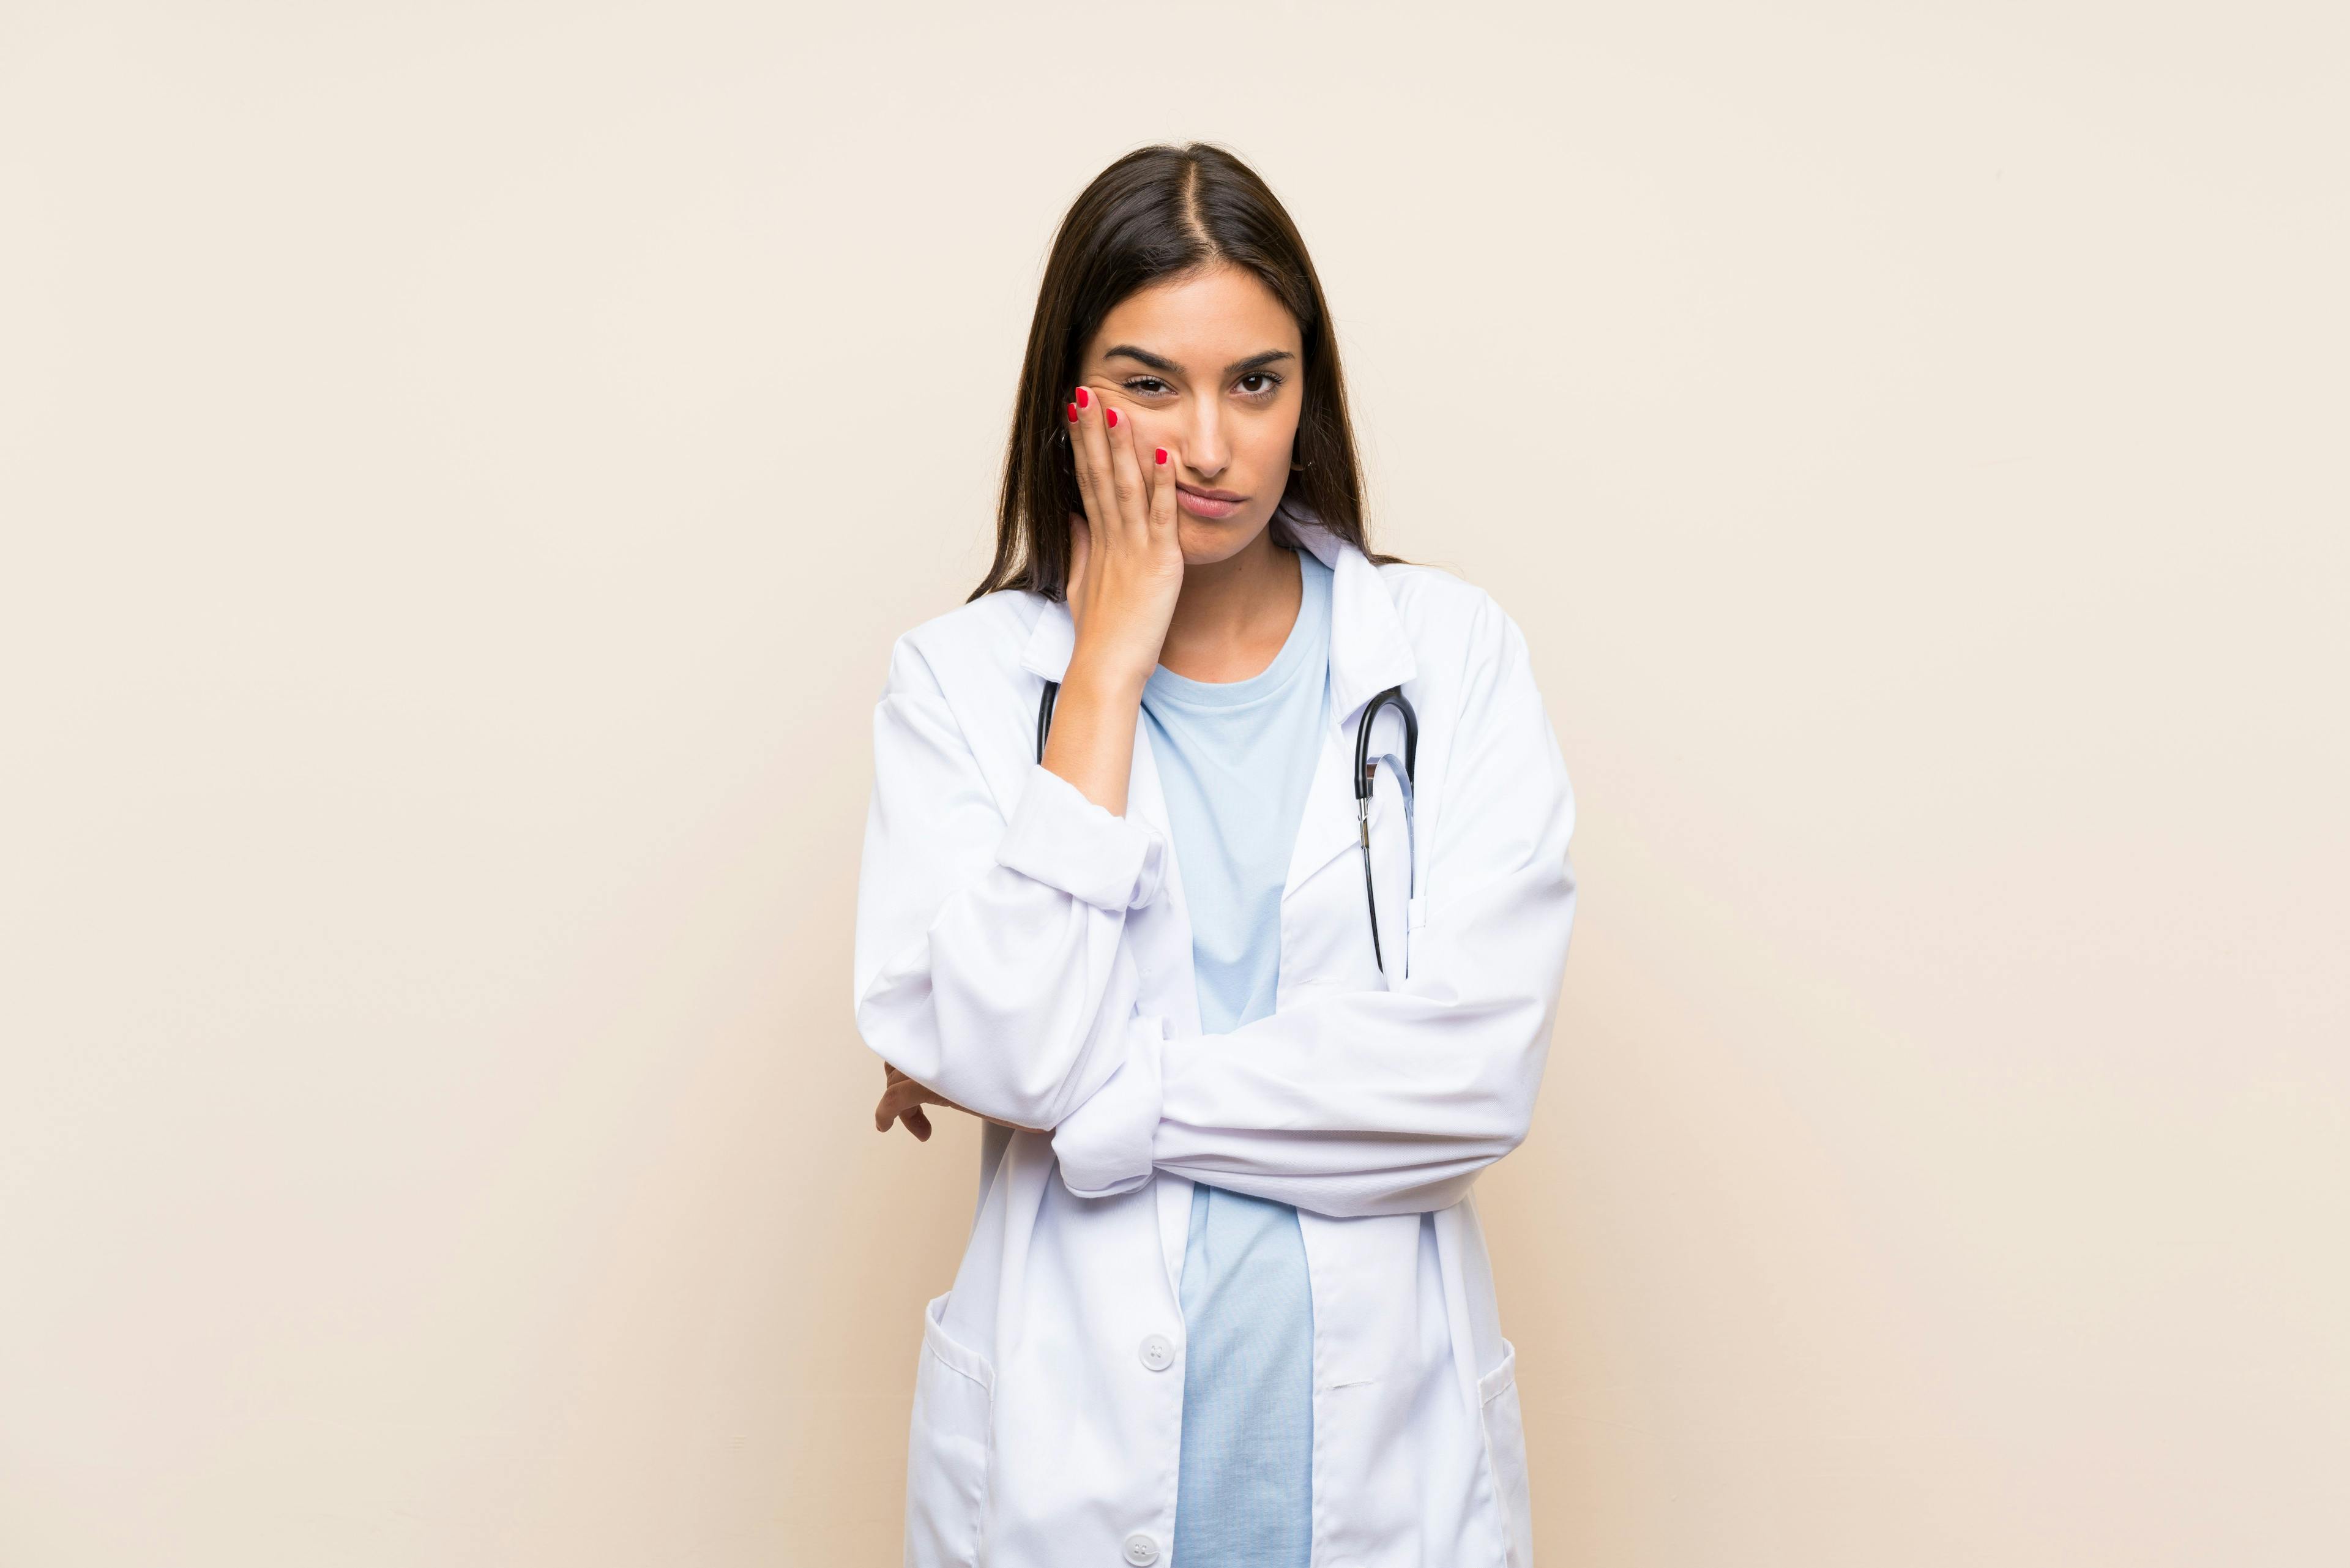 Doctor scowling with hand on her face ©luismolinero-stock.adobe.com